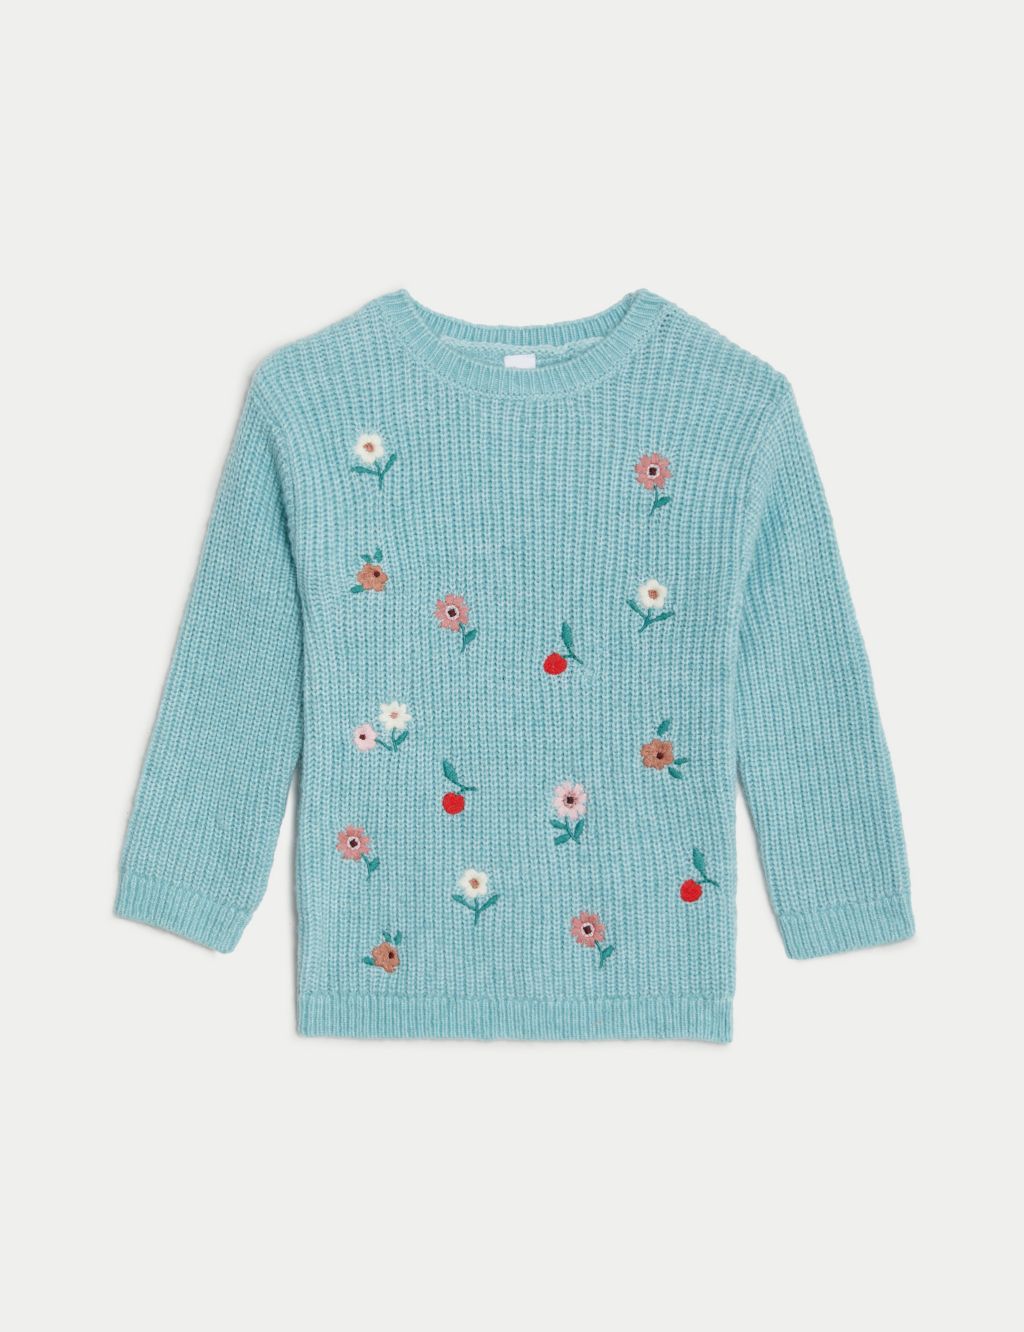 Floral Knitted Jumper (0-3 Yrs) image 1